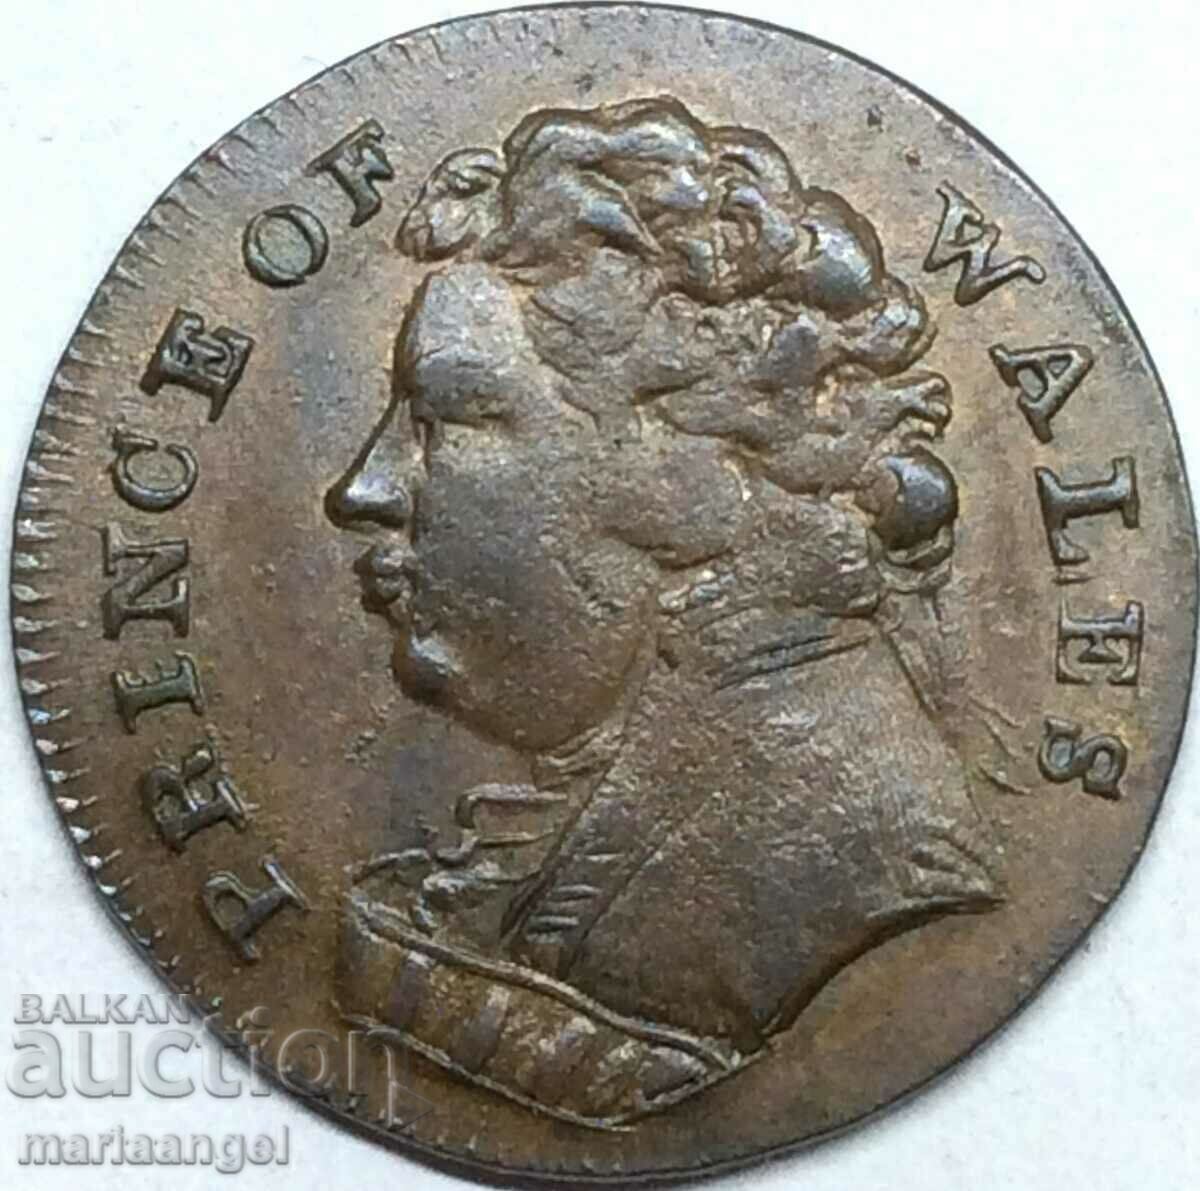 Farthing 1793 England "Prince of Wales" 2.87g 20mm bronze